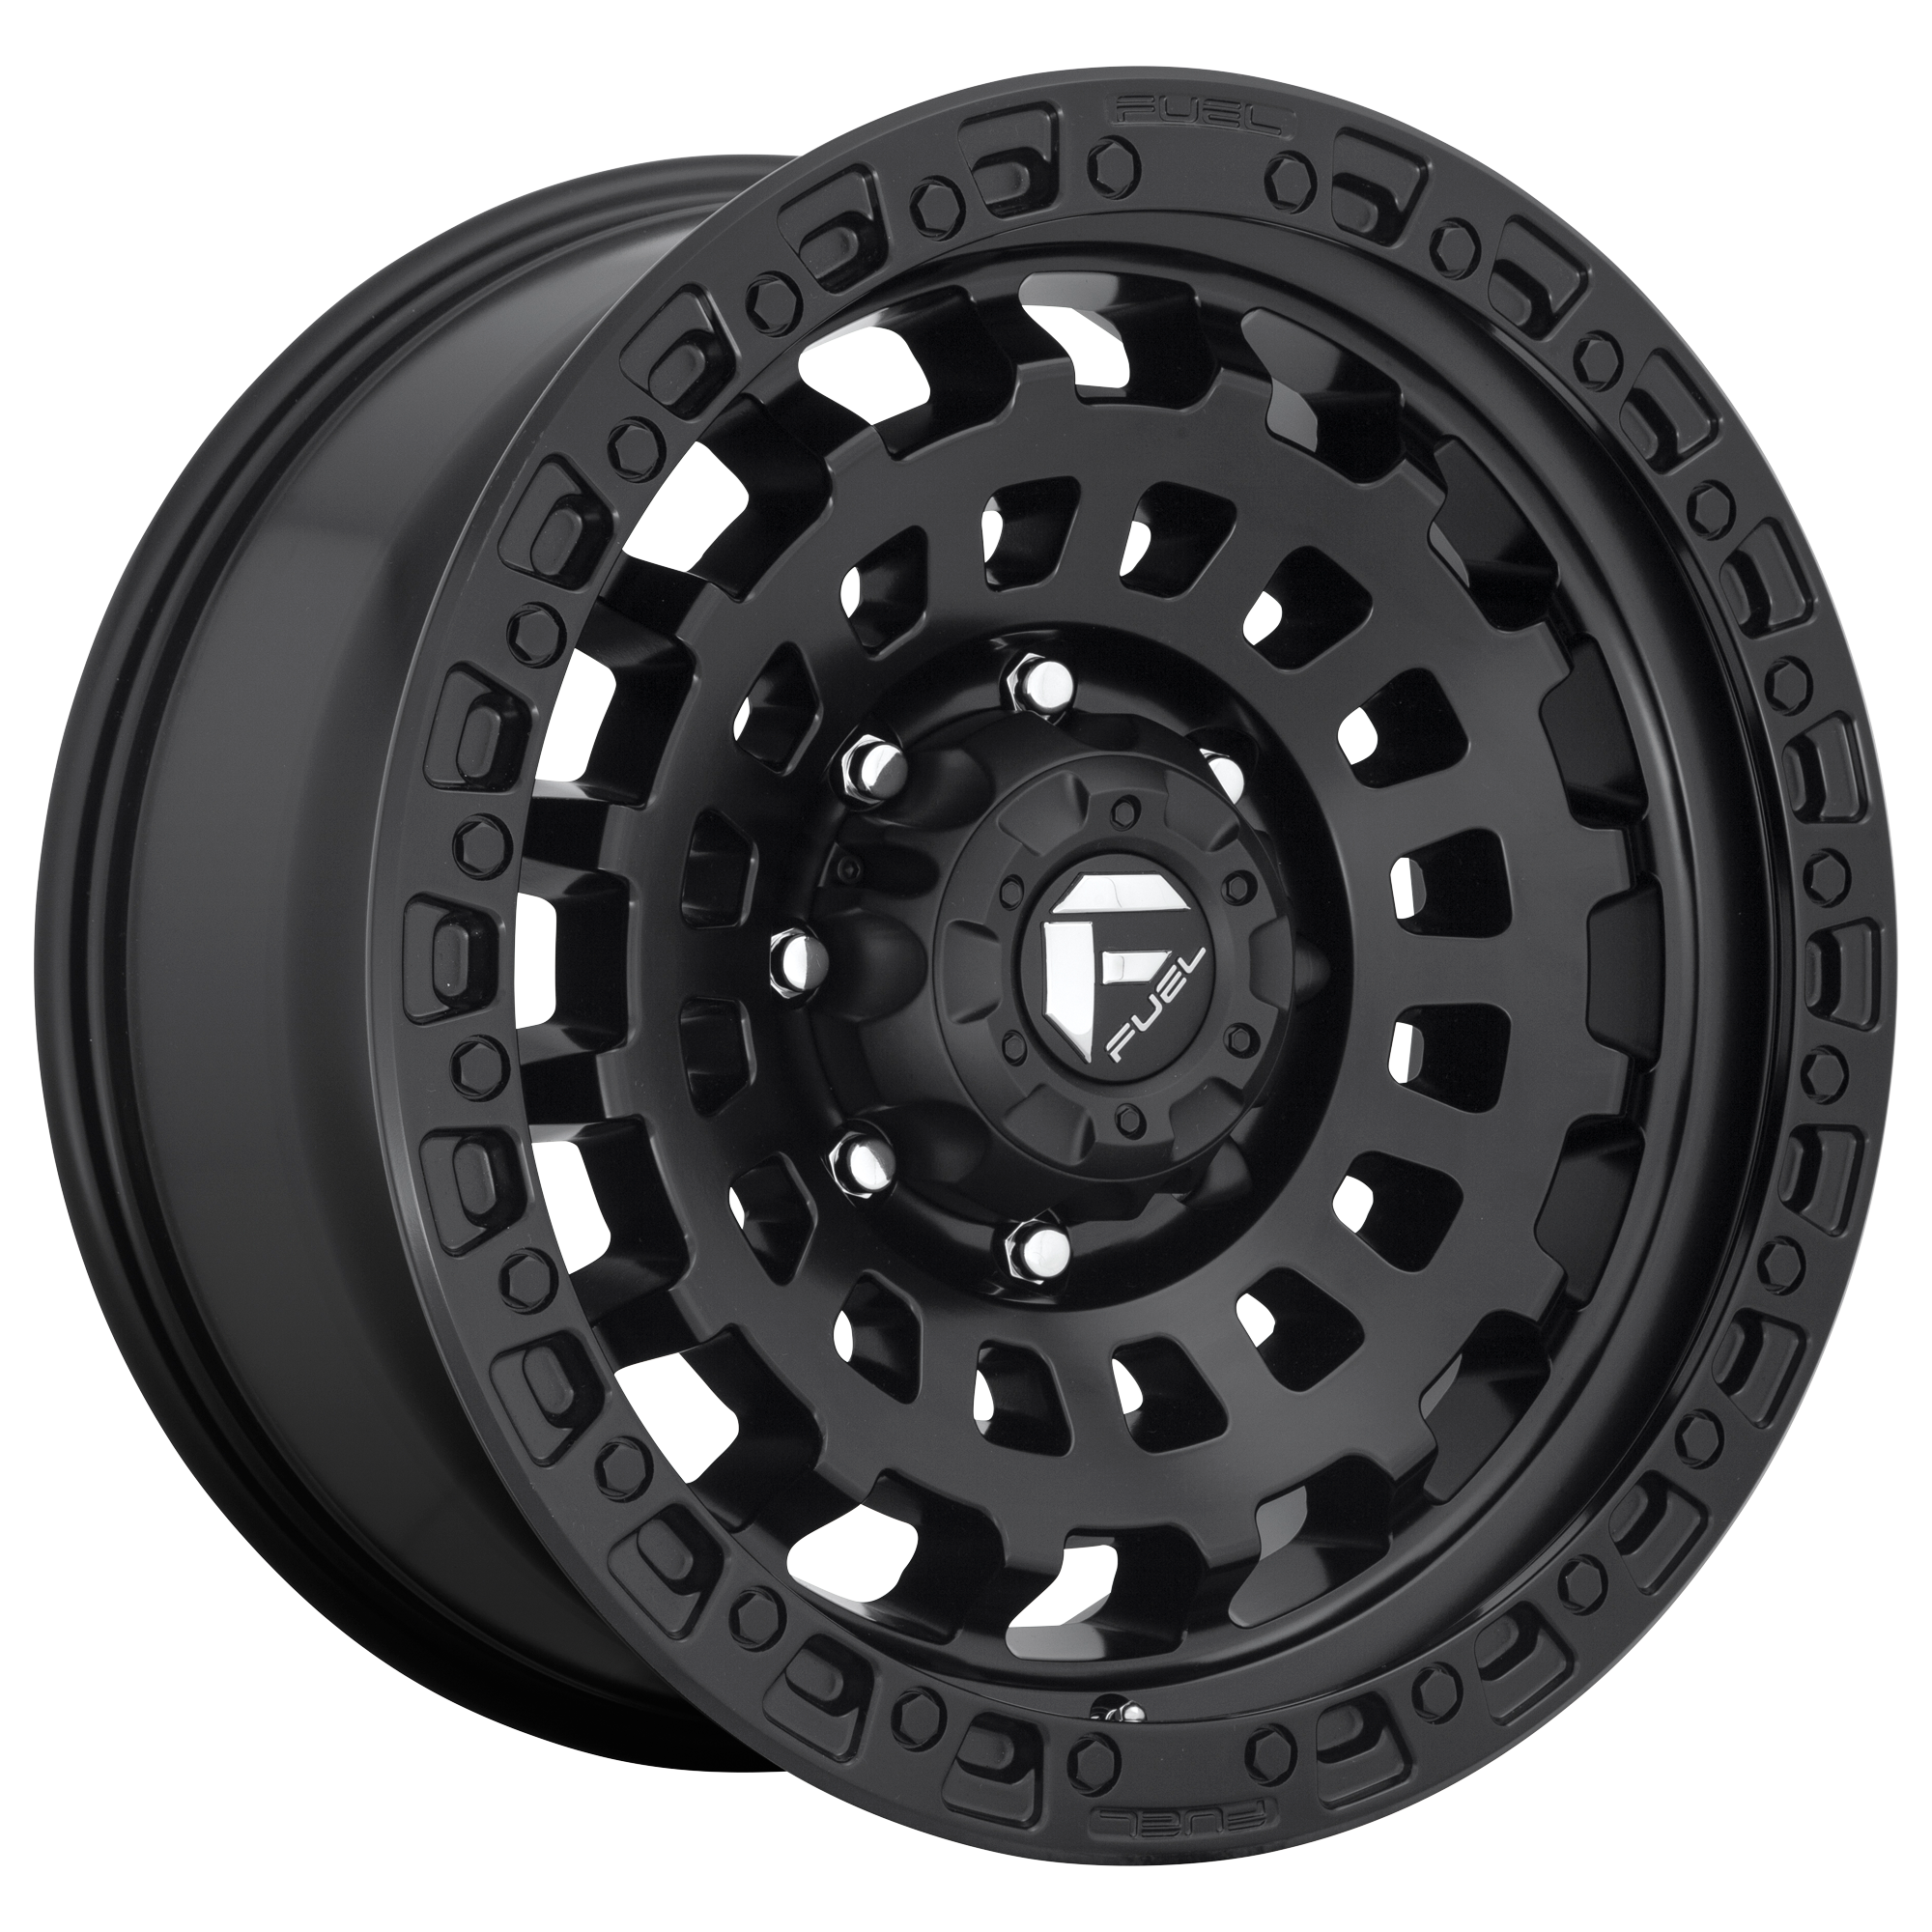 ZEPHYR 20x9 5x112.00 MATTE BLACK (20 mm) - Tires and Engine Performance